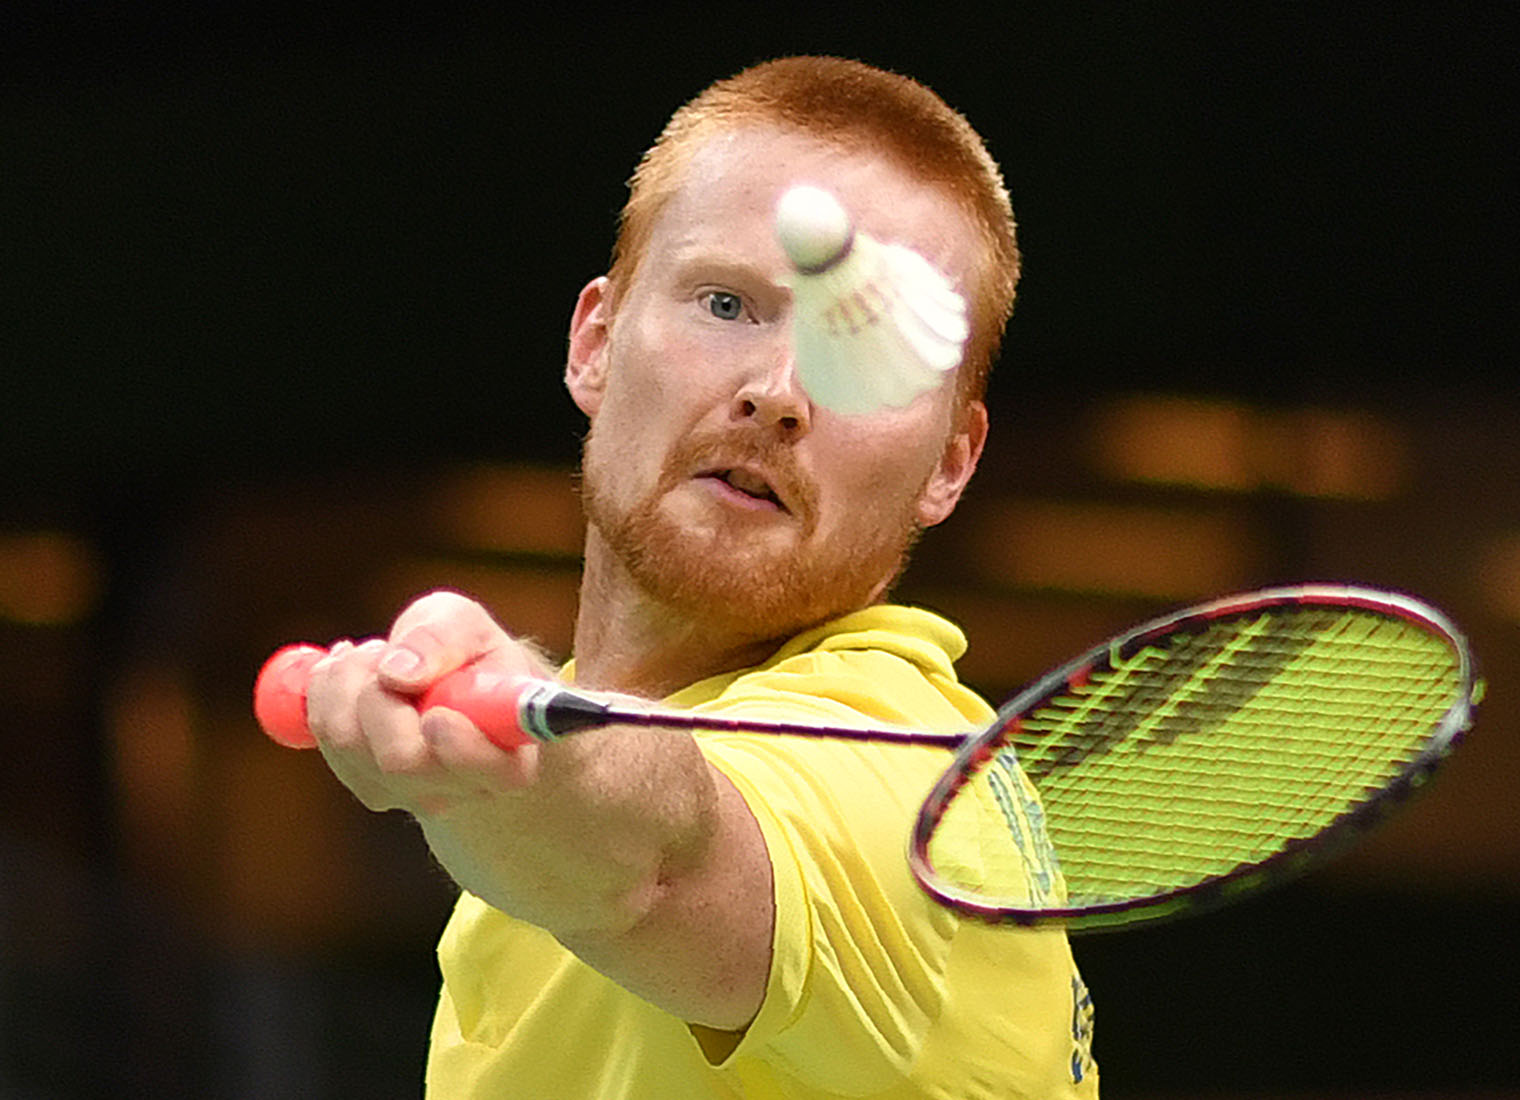 TOPSHOT - Sweden's Henri Hurskainen returns to India's Srikanth Kidambi during their men's singles qualifying badminton match at the Riocentro stadium in Rio de Janeiro on August 14, 2016, at the Rio 2016 Olympic Games. / AFP / Ed JONES (Photo credit should read ED JONES/AFP/Getty Images)